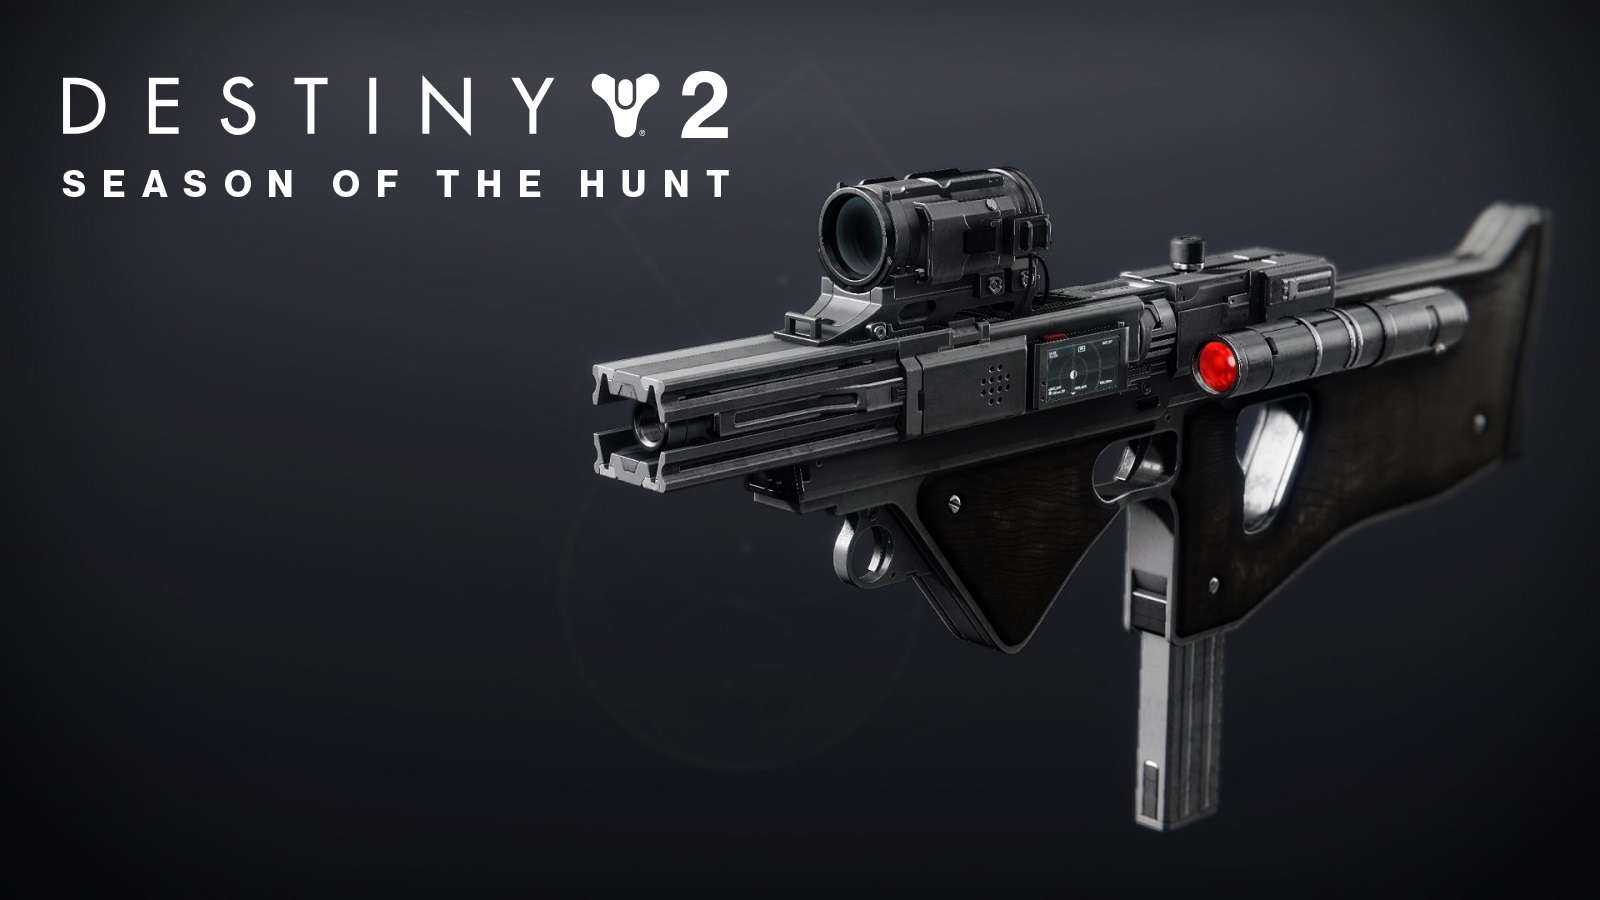 Destiny 2 Beyond Light Friction Fire SMG With Season of the Hunt Text